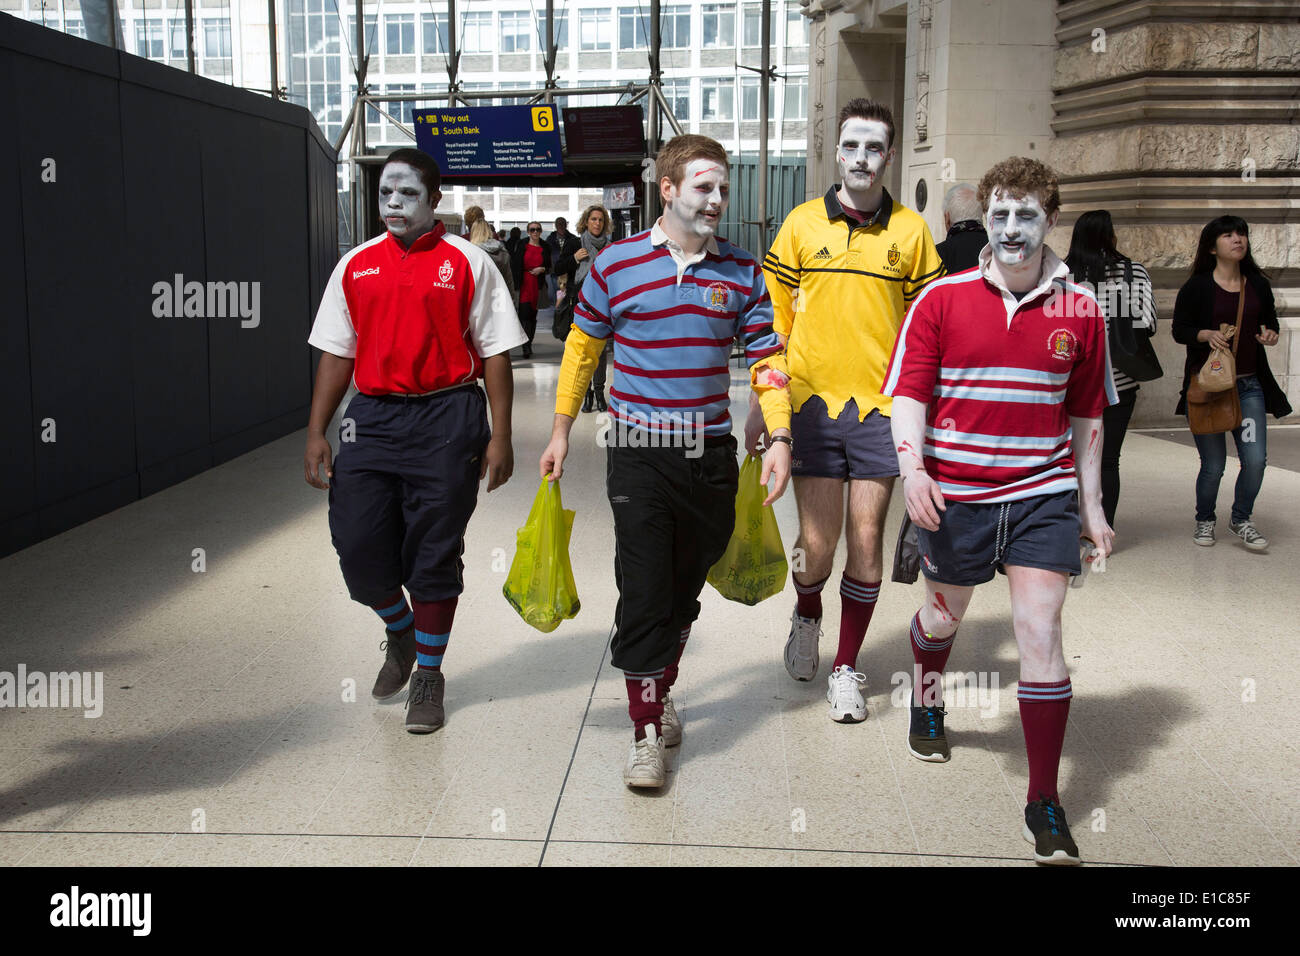 People dressed up in crazy zombie costumes at Waterloo station on their way to the Rugby Sevens tournament. London, UK. Stock Photo